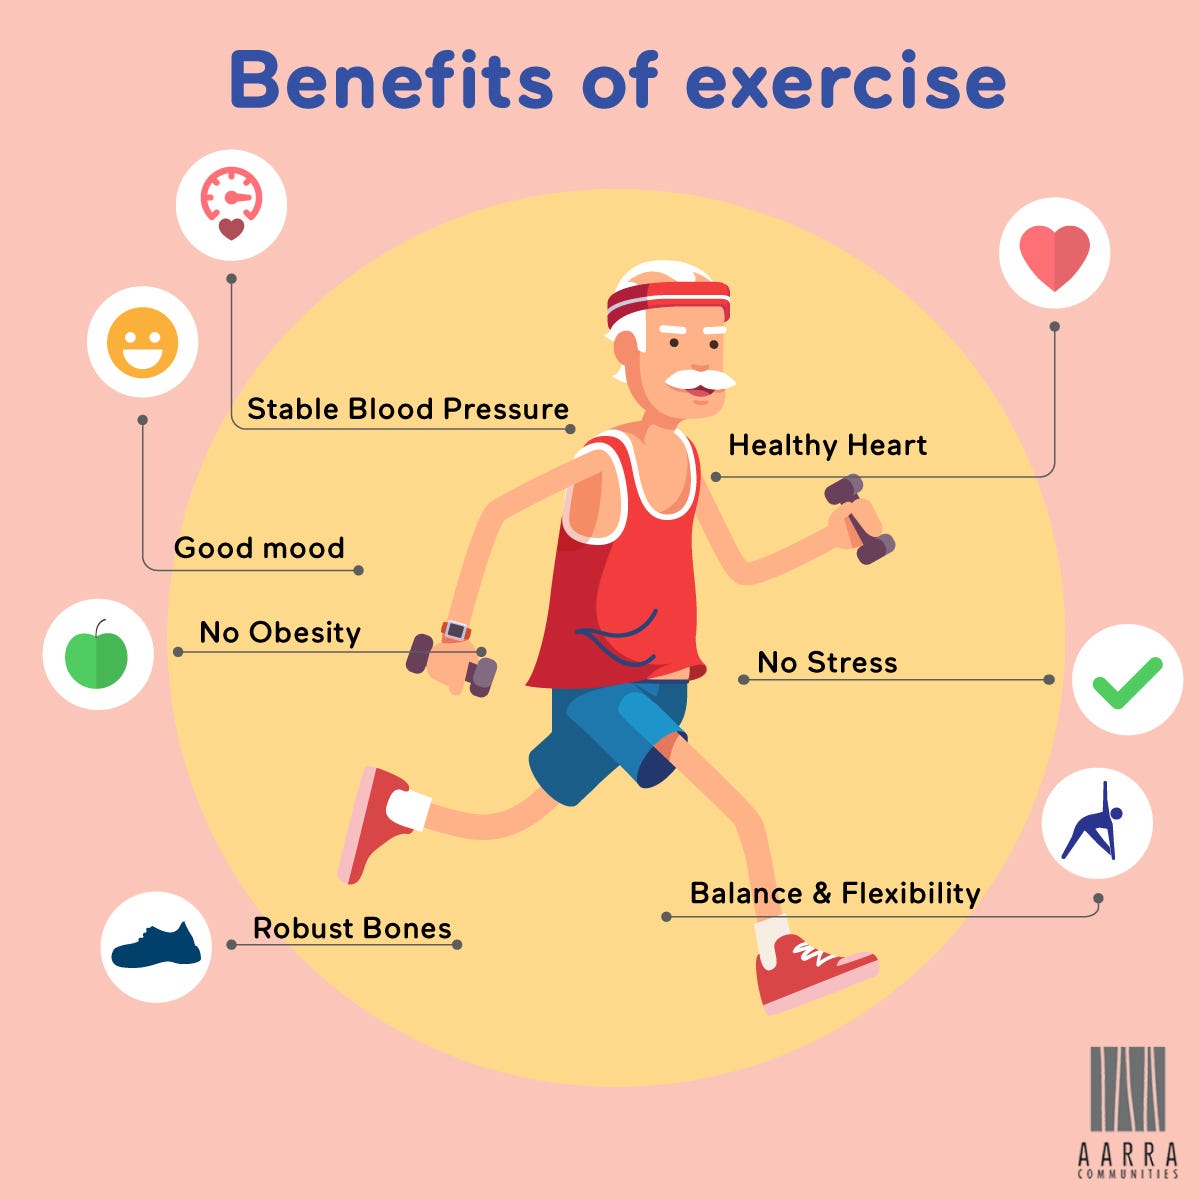 Are you good at sport. Benefits of exercise. Exercises по теме Health. Упражнения по теме Health. Health benefits of exercise.